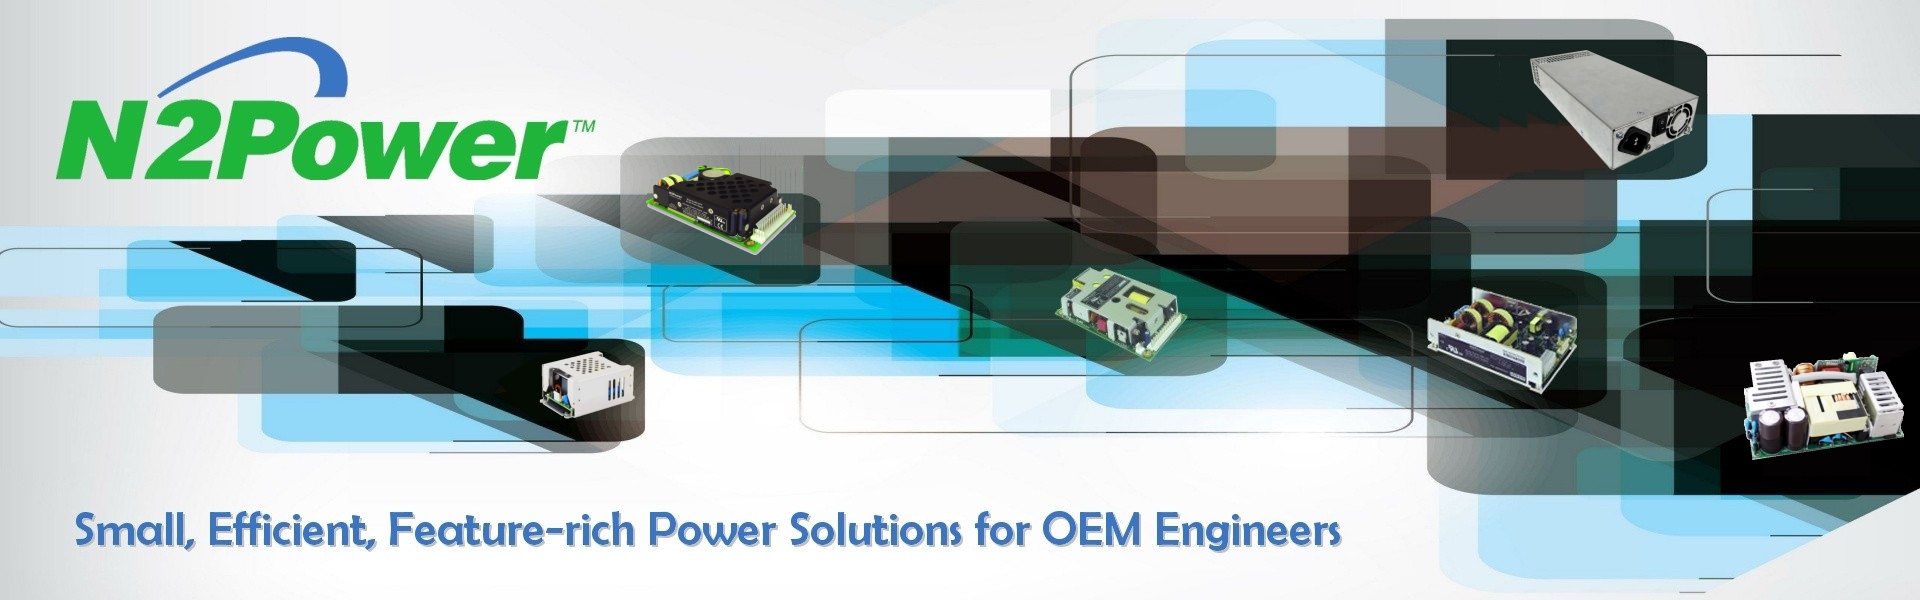 N2Power - Small, efficient, feature-rich power solutions for OEM Engineers